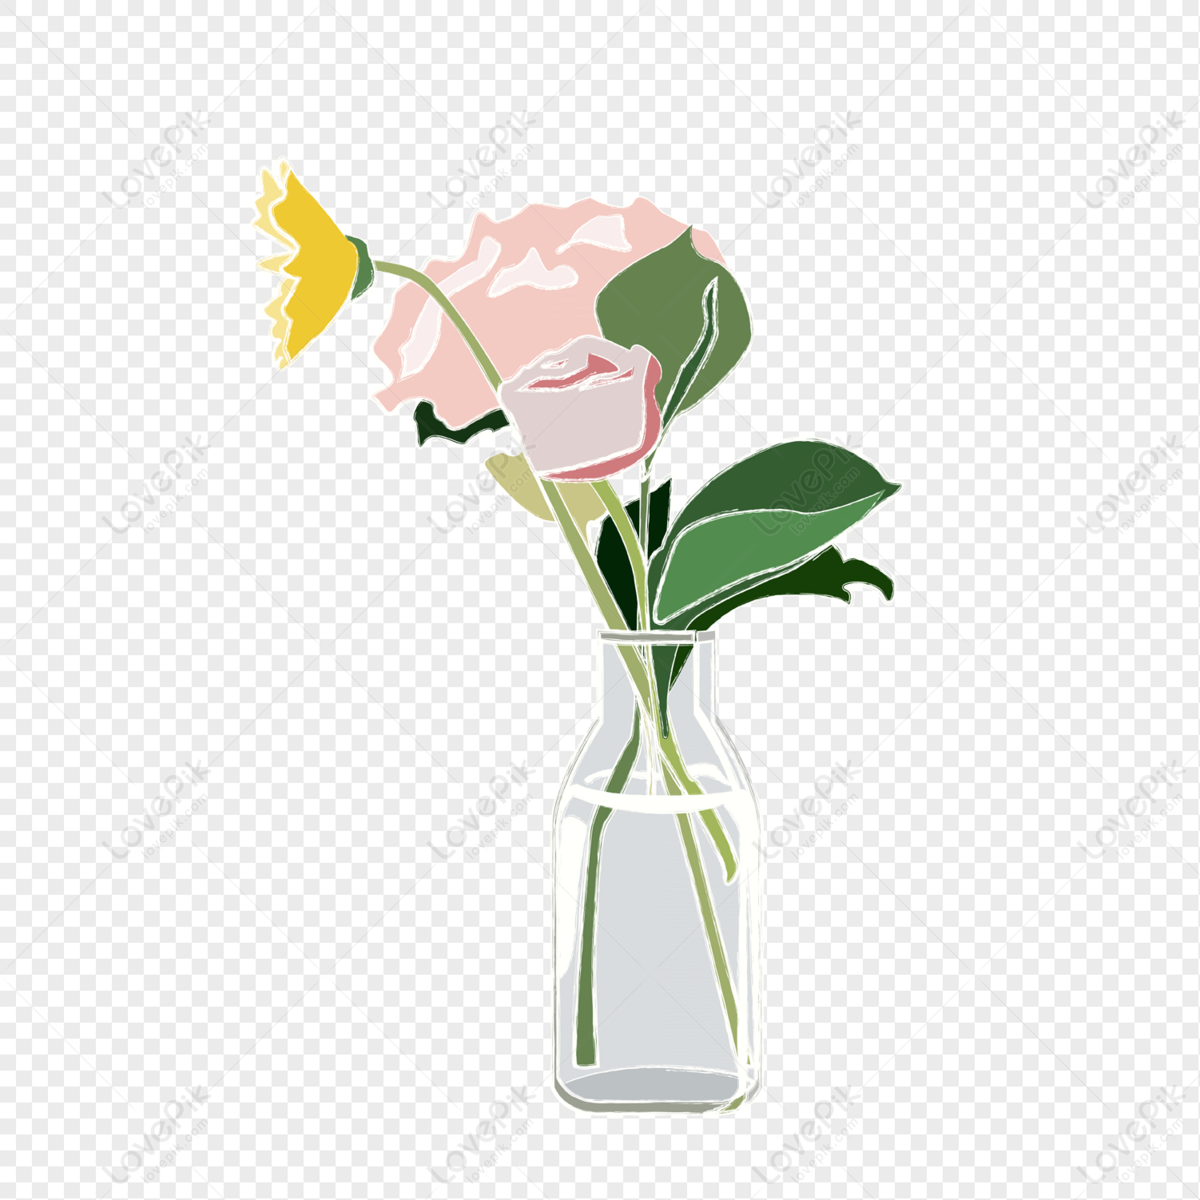 Flowers In A Vase PNG Transparent Background And Clipart Image For Free  Download - Lovepik | 401252020